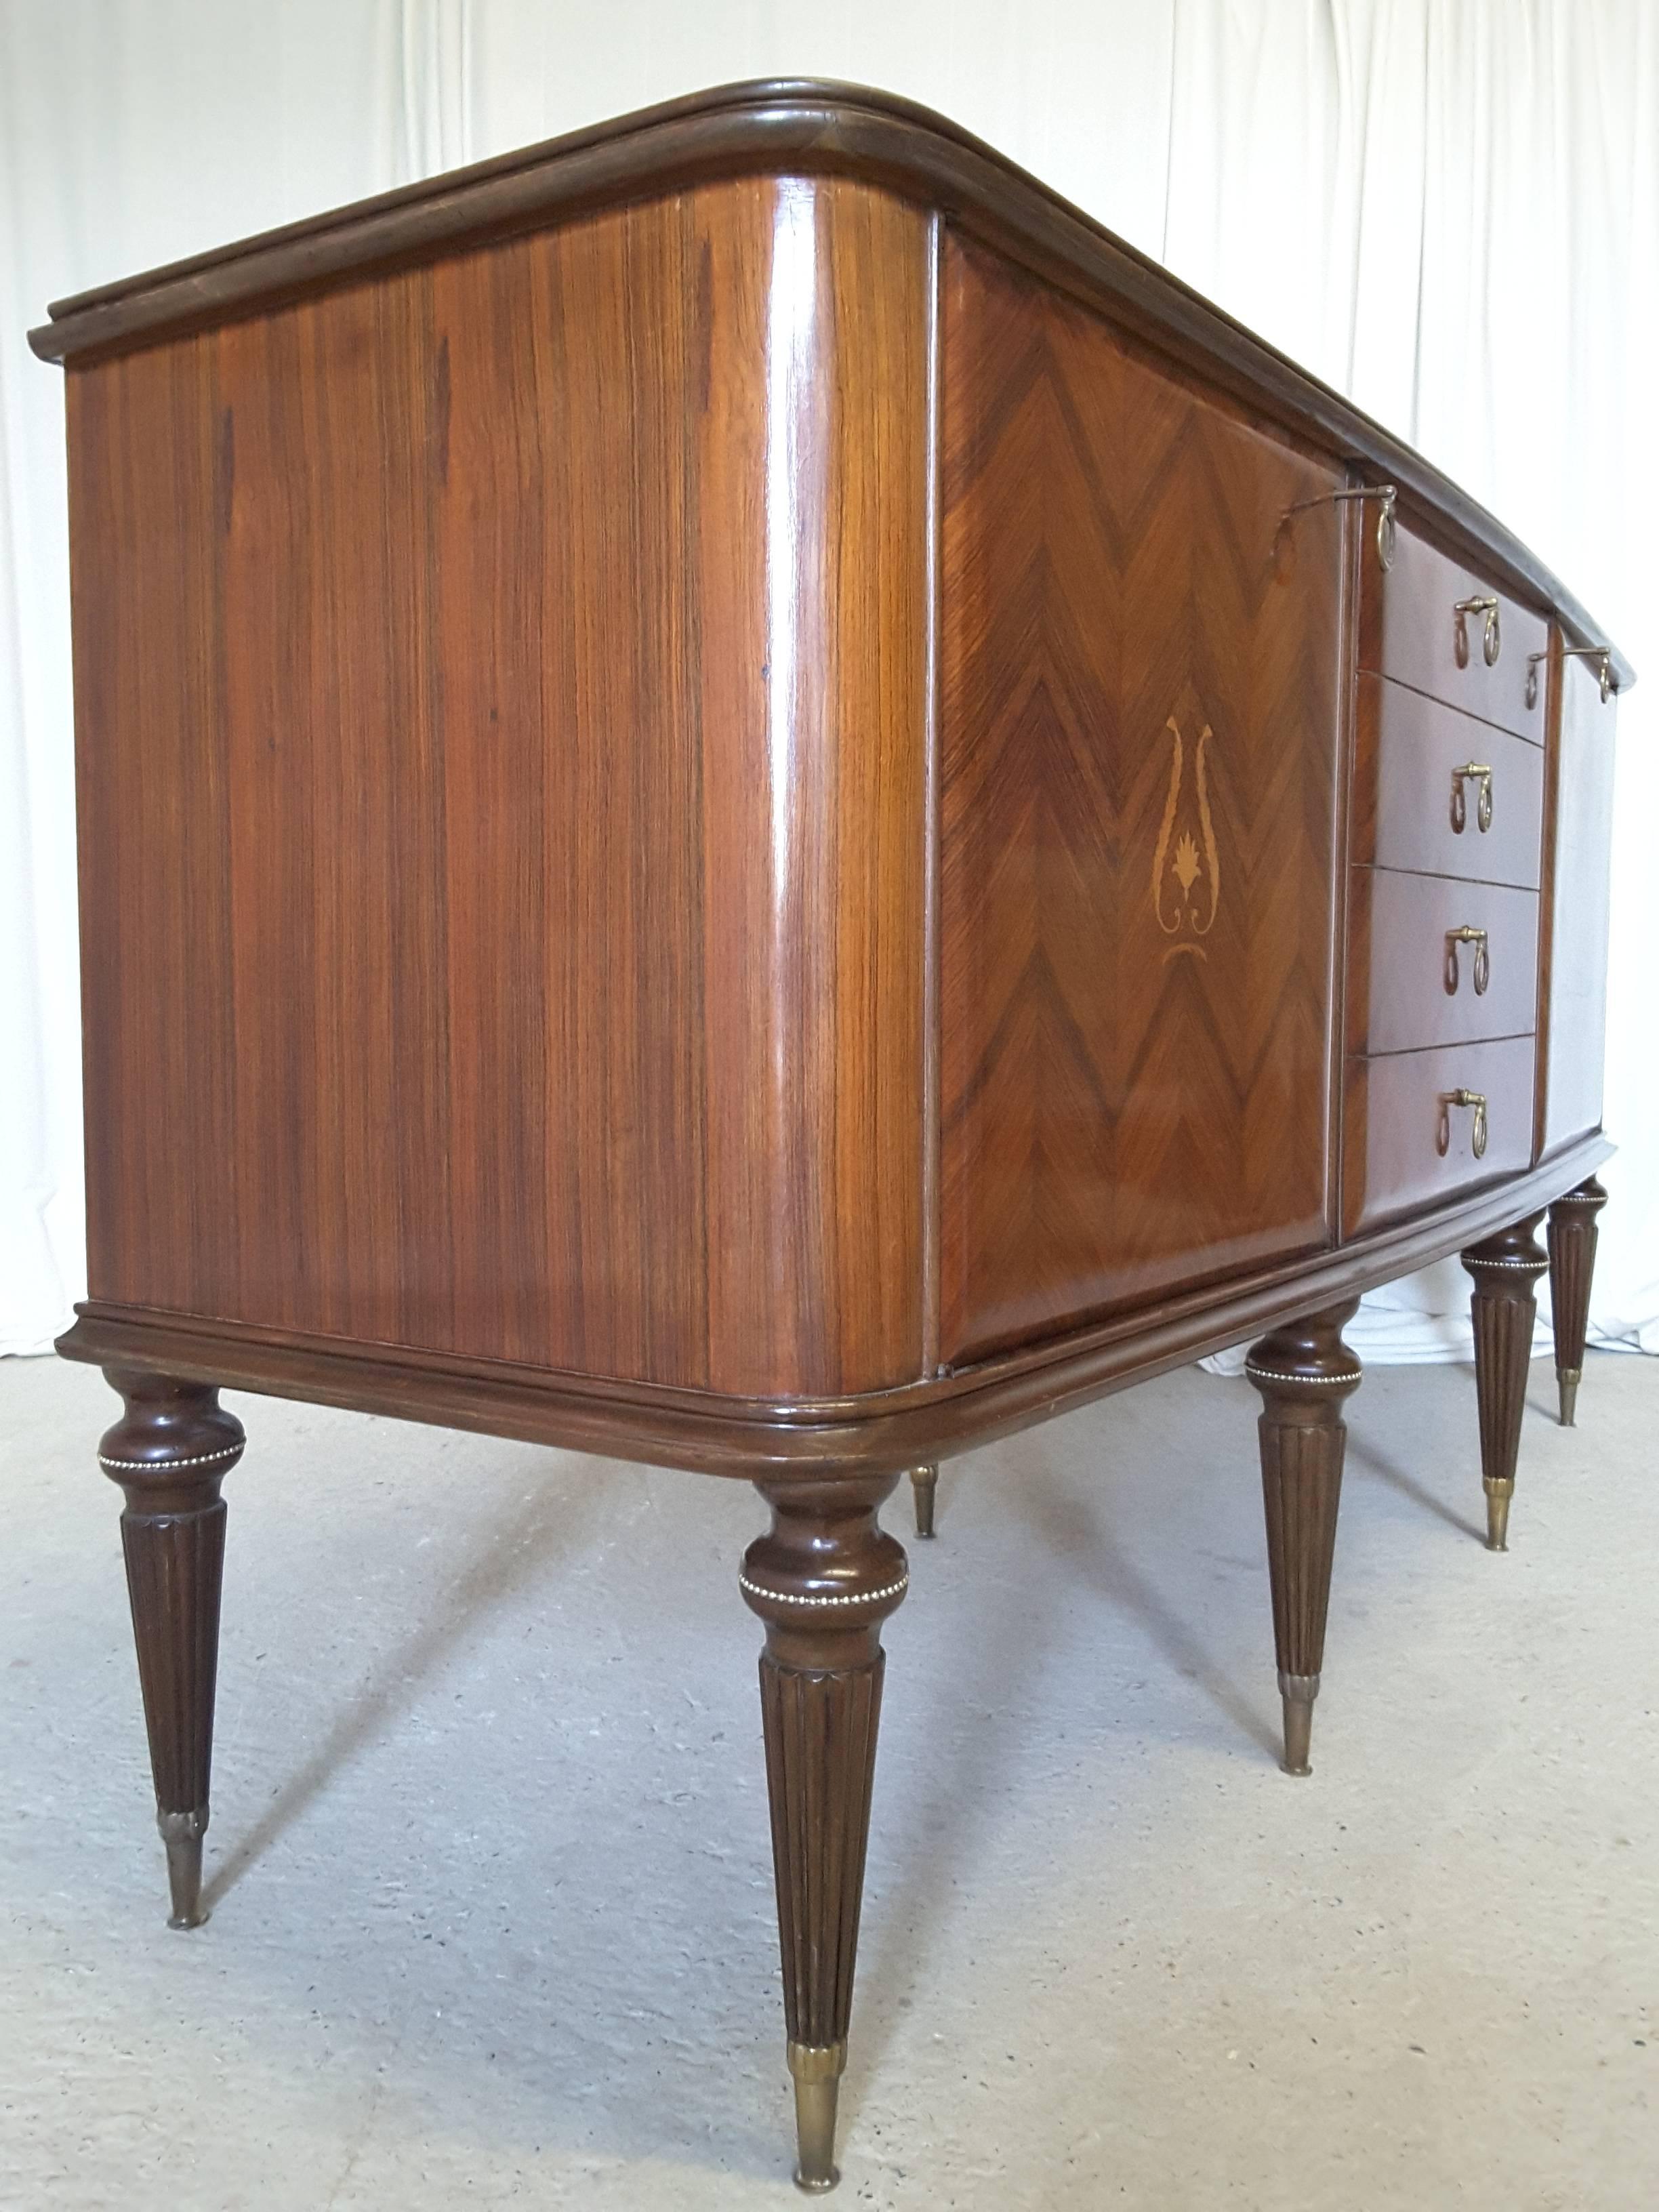 Italian sideboard inlaid with herringbone rosewood. Two doors with shelved internal cupboards and four drawers to the center. The top is reverse painted glass with subtle coper tones to complement the rosewood. Original working locks and keys.